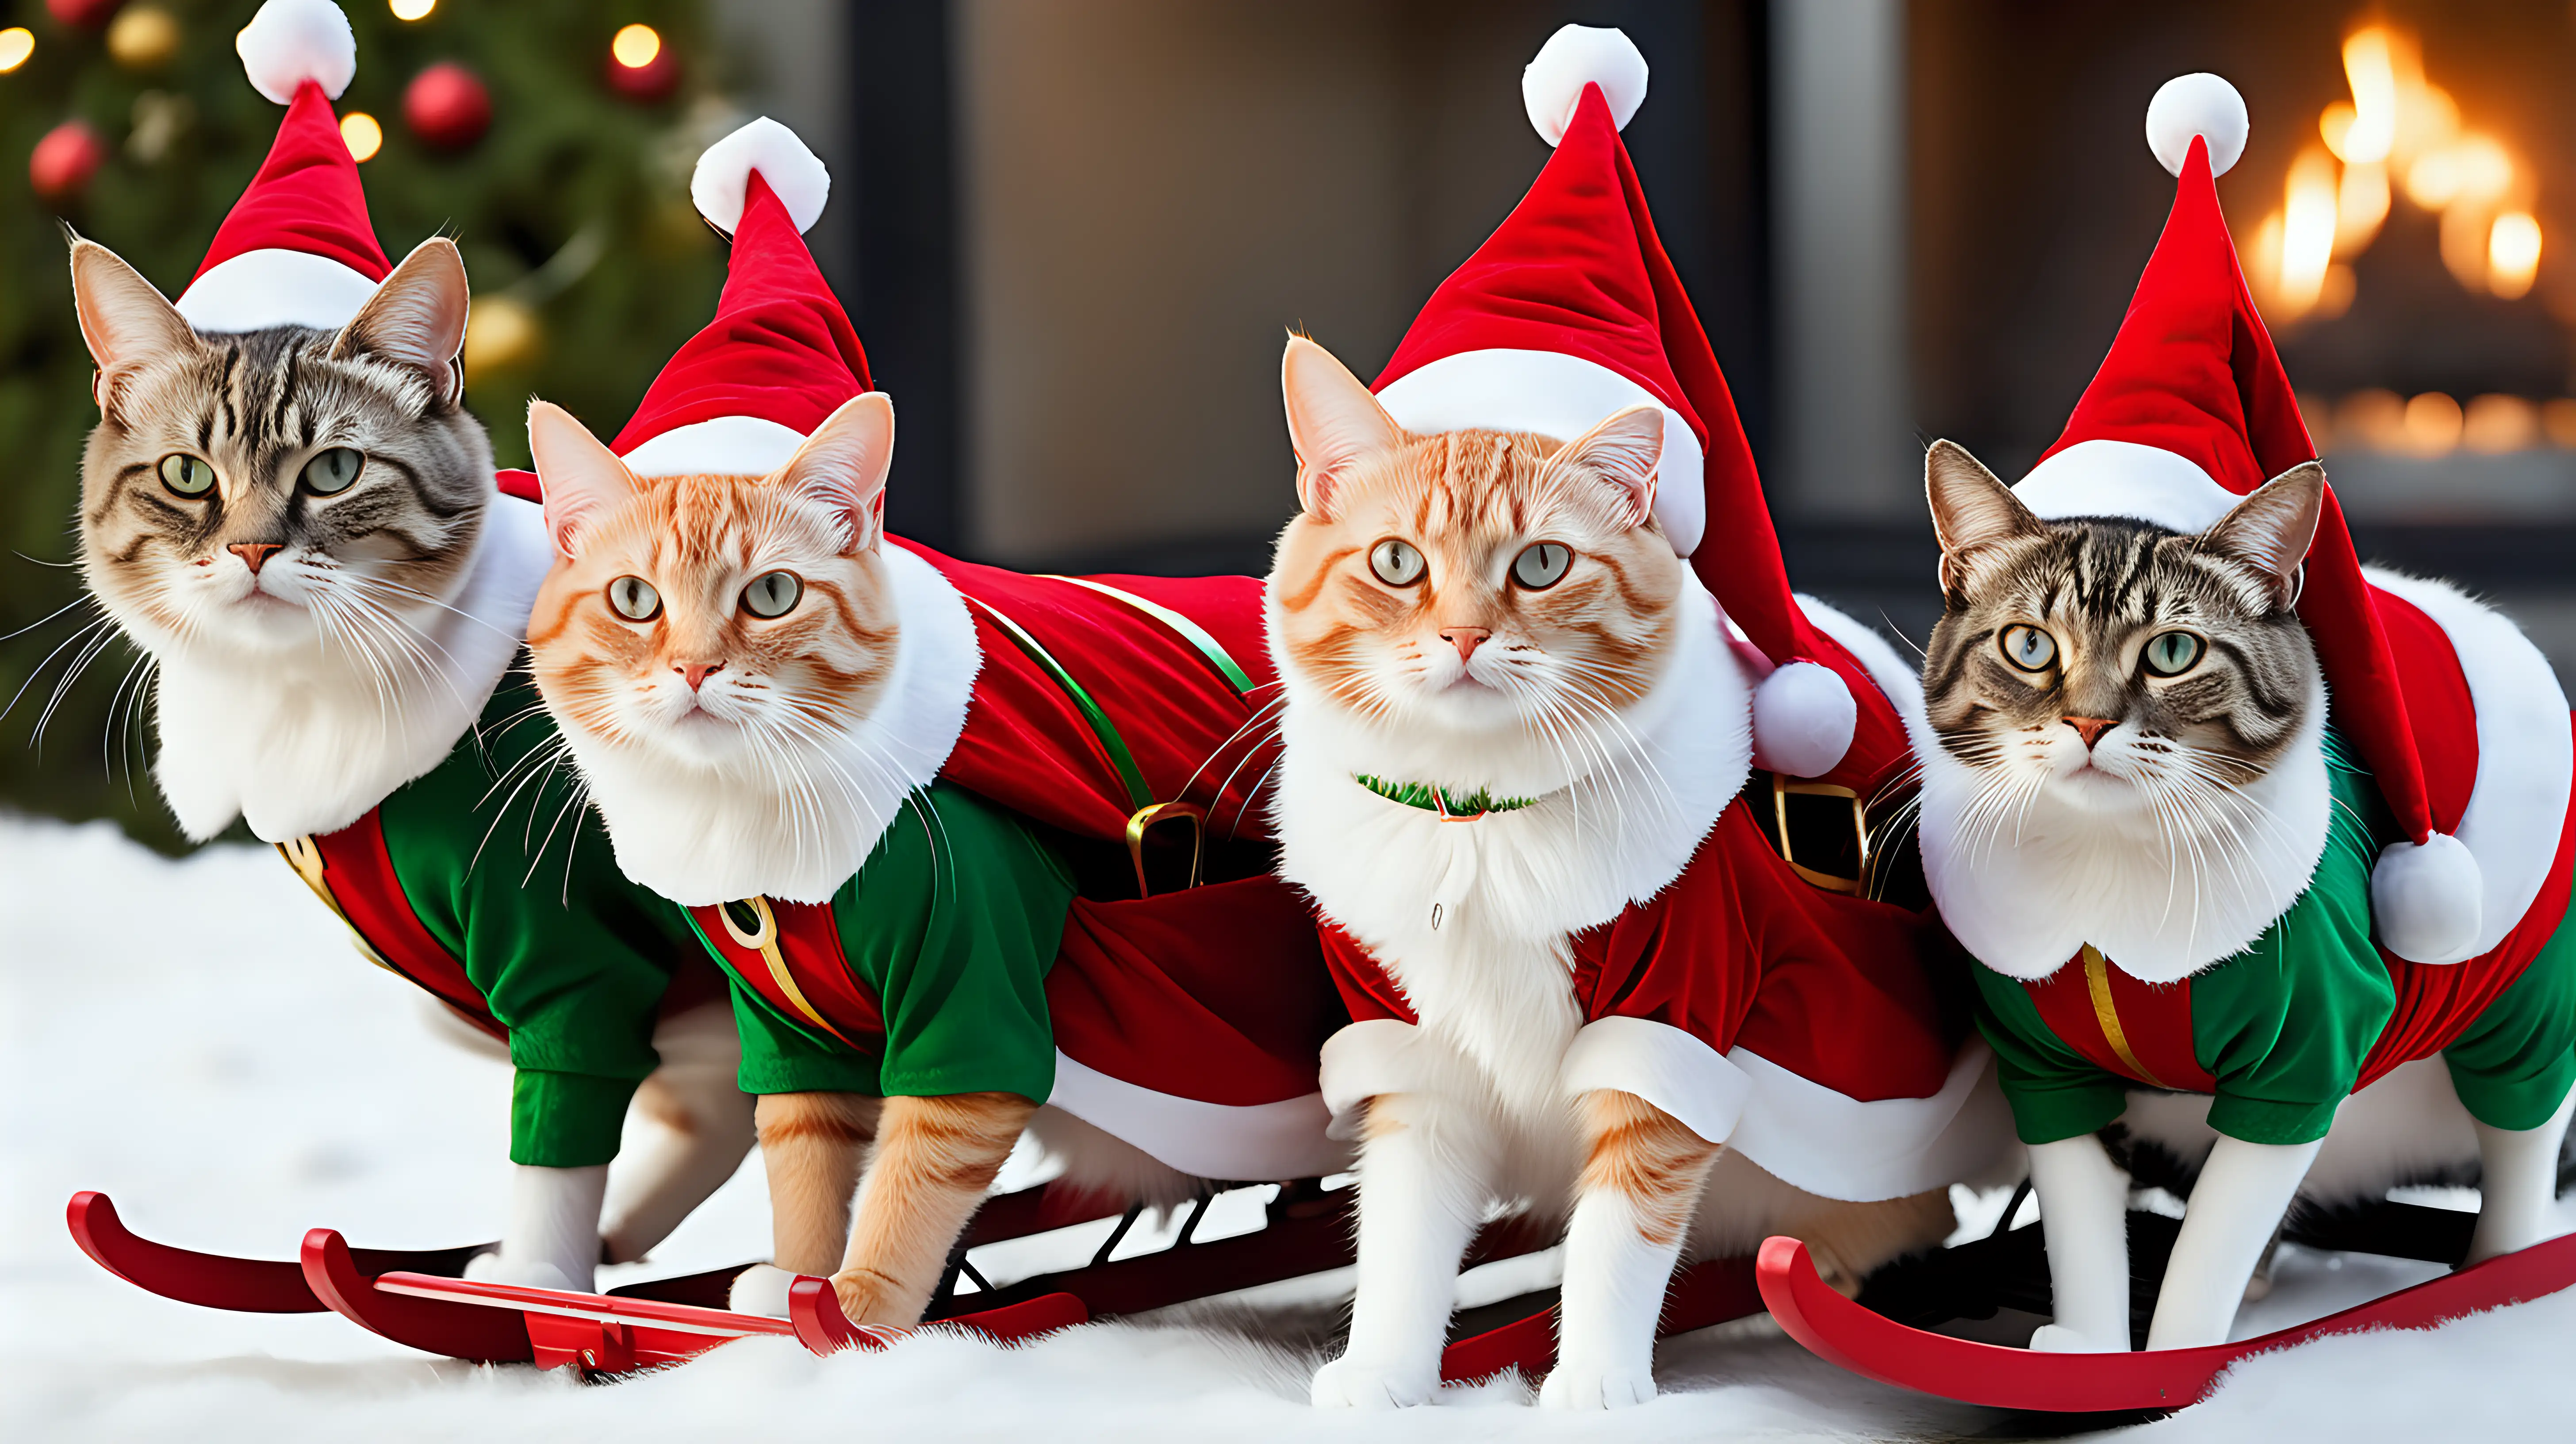 3 cats wearing elf costumes in Santa's sled led by a red nosed reindeer with wings